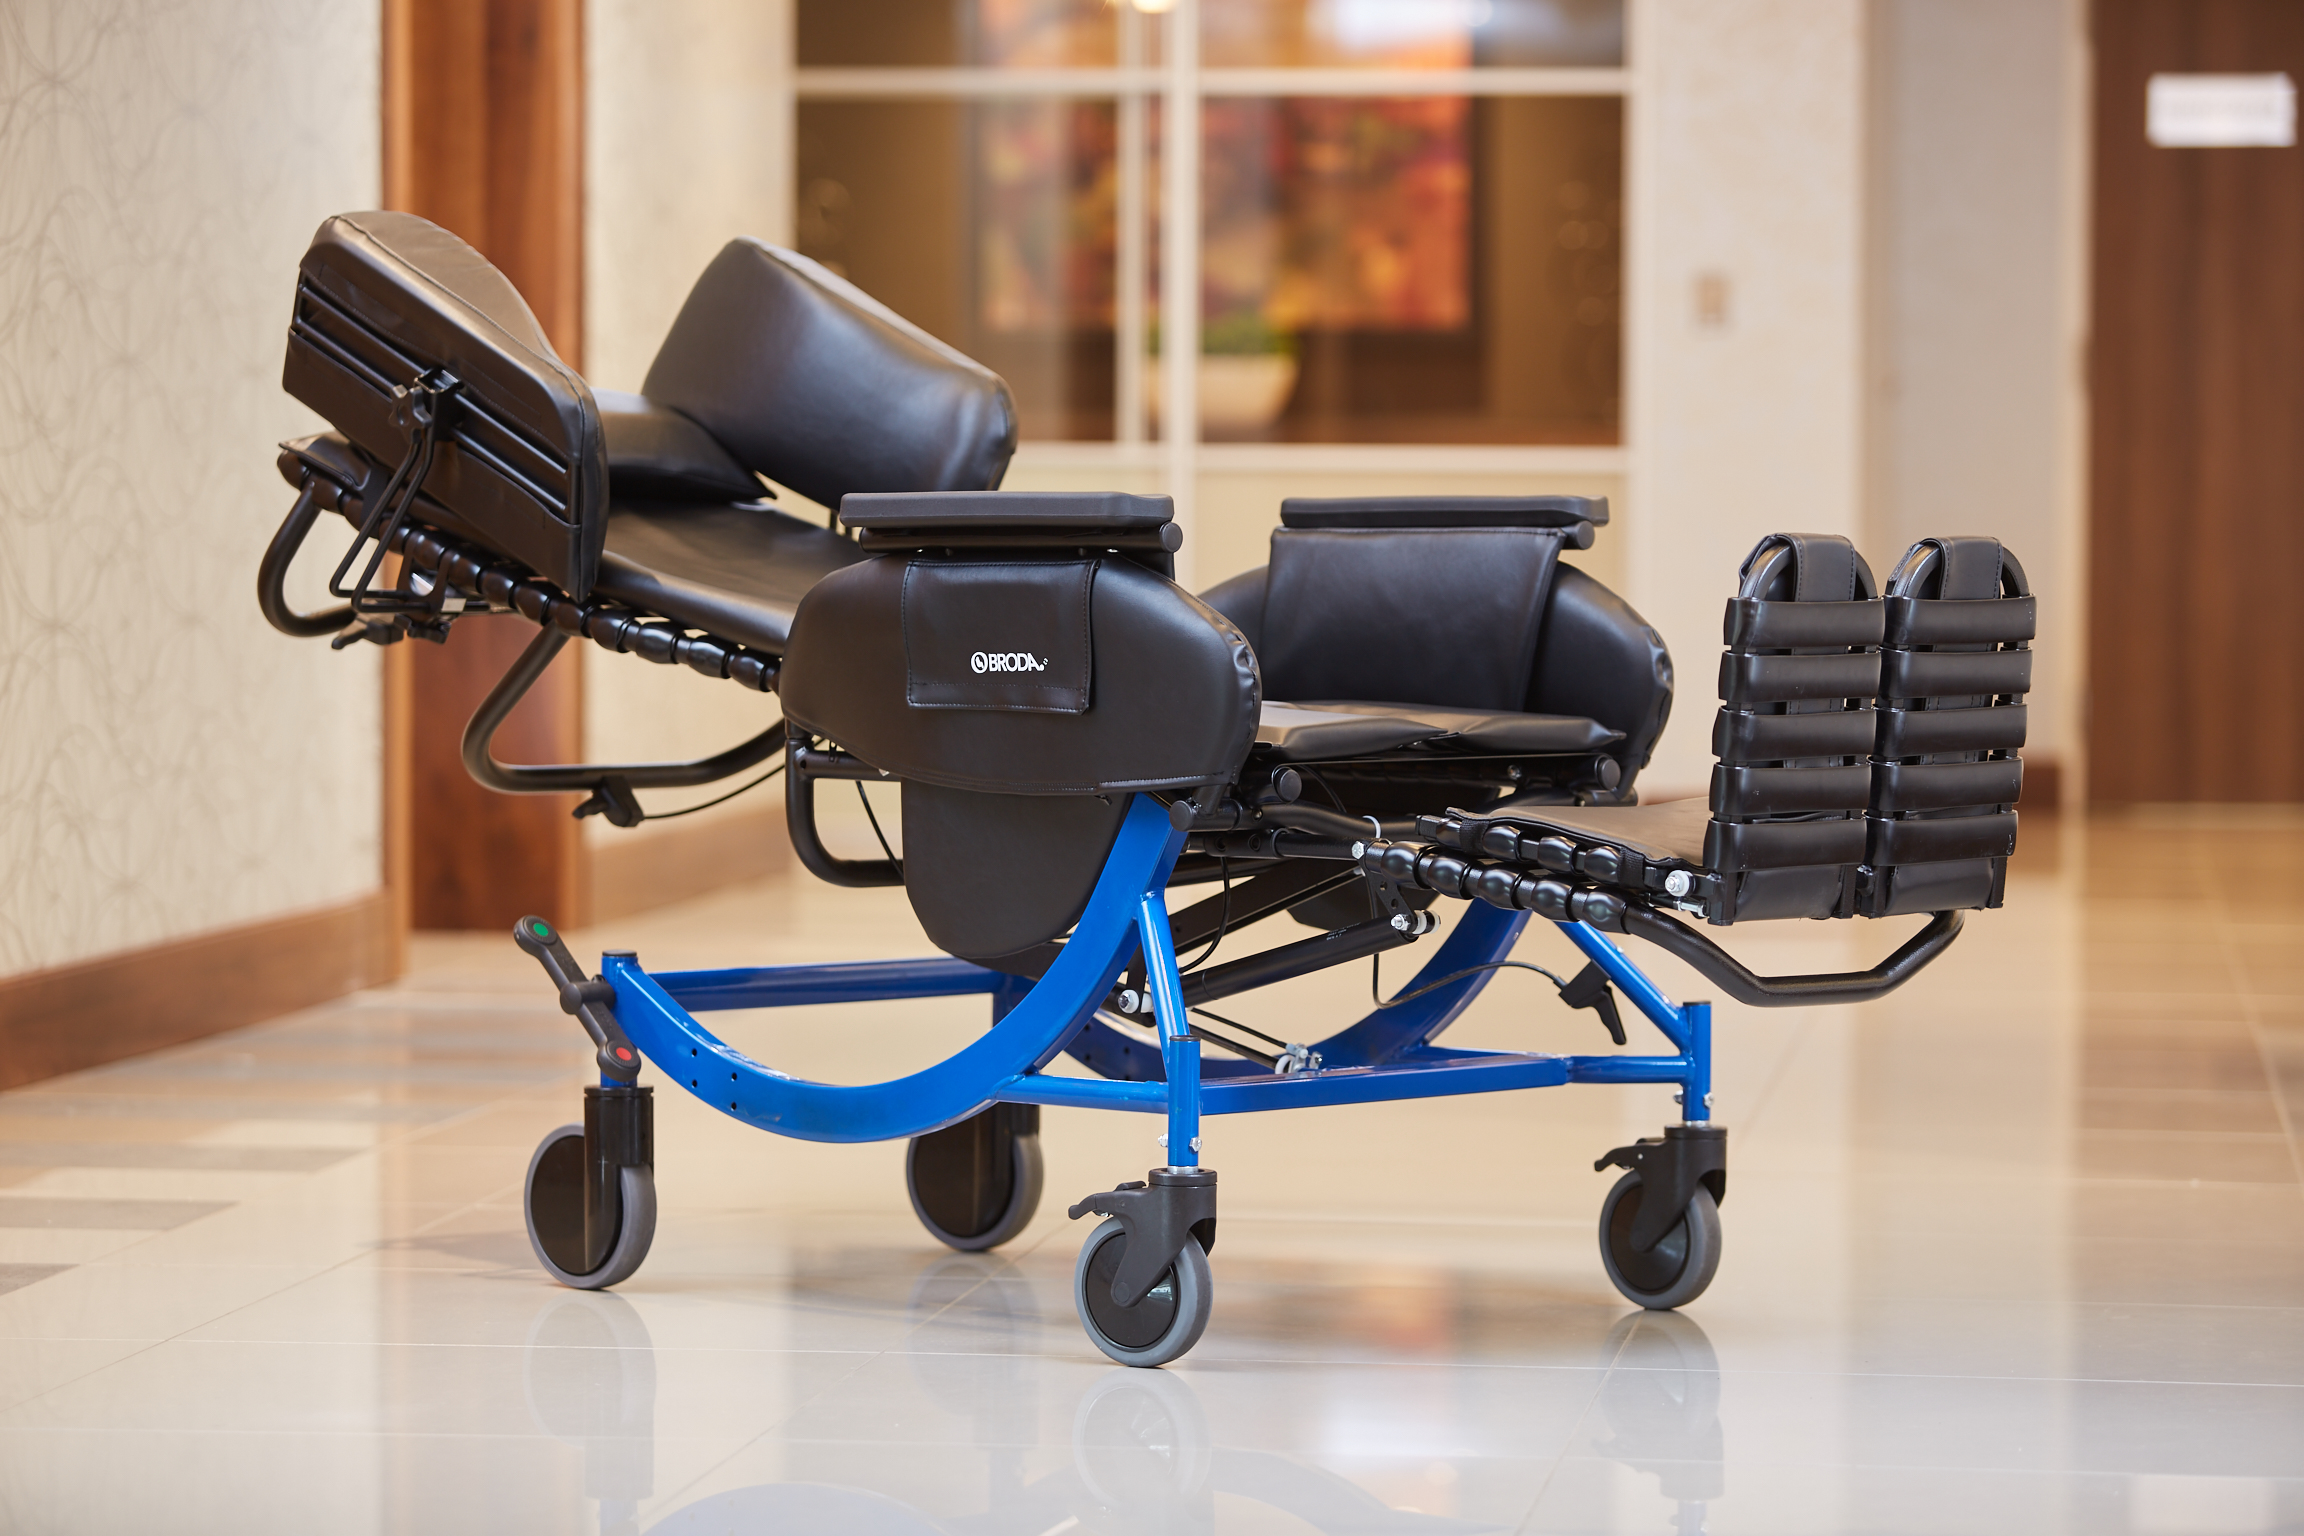 Synthesis Rehab Wheelchair in Layed Back Position